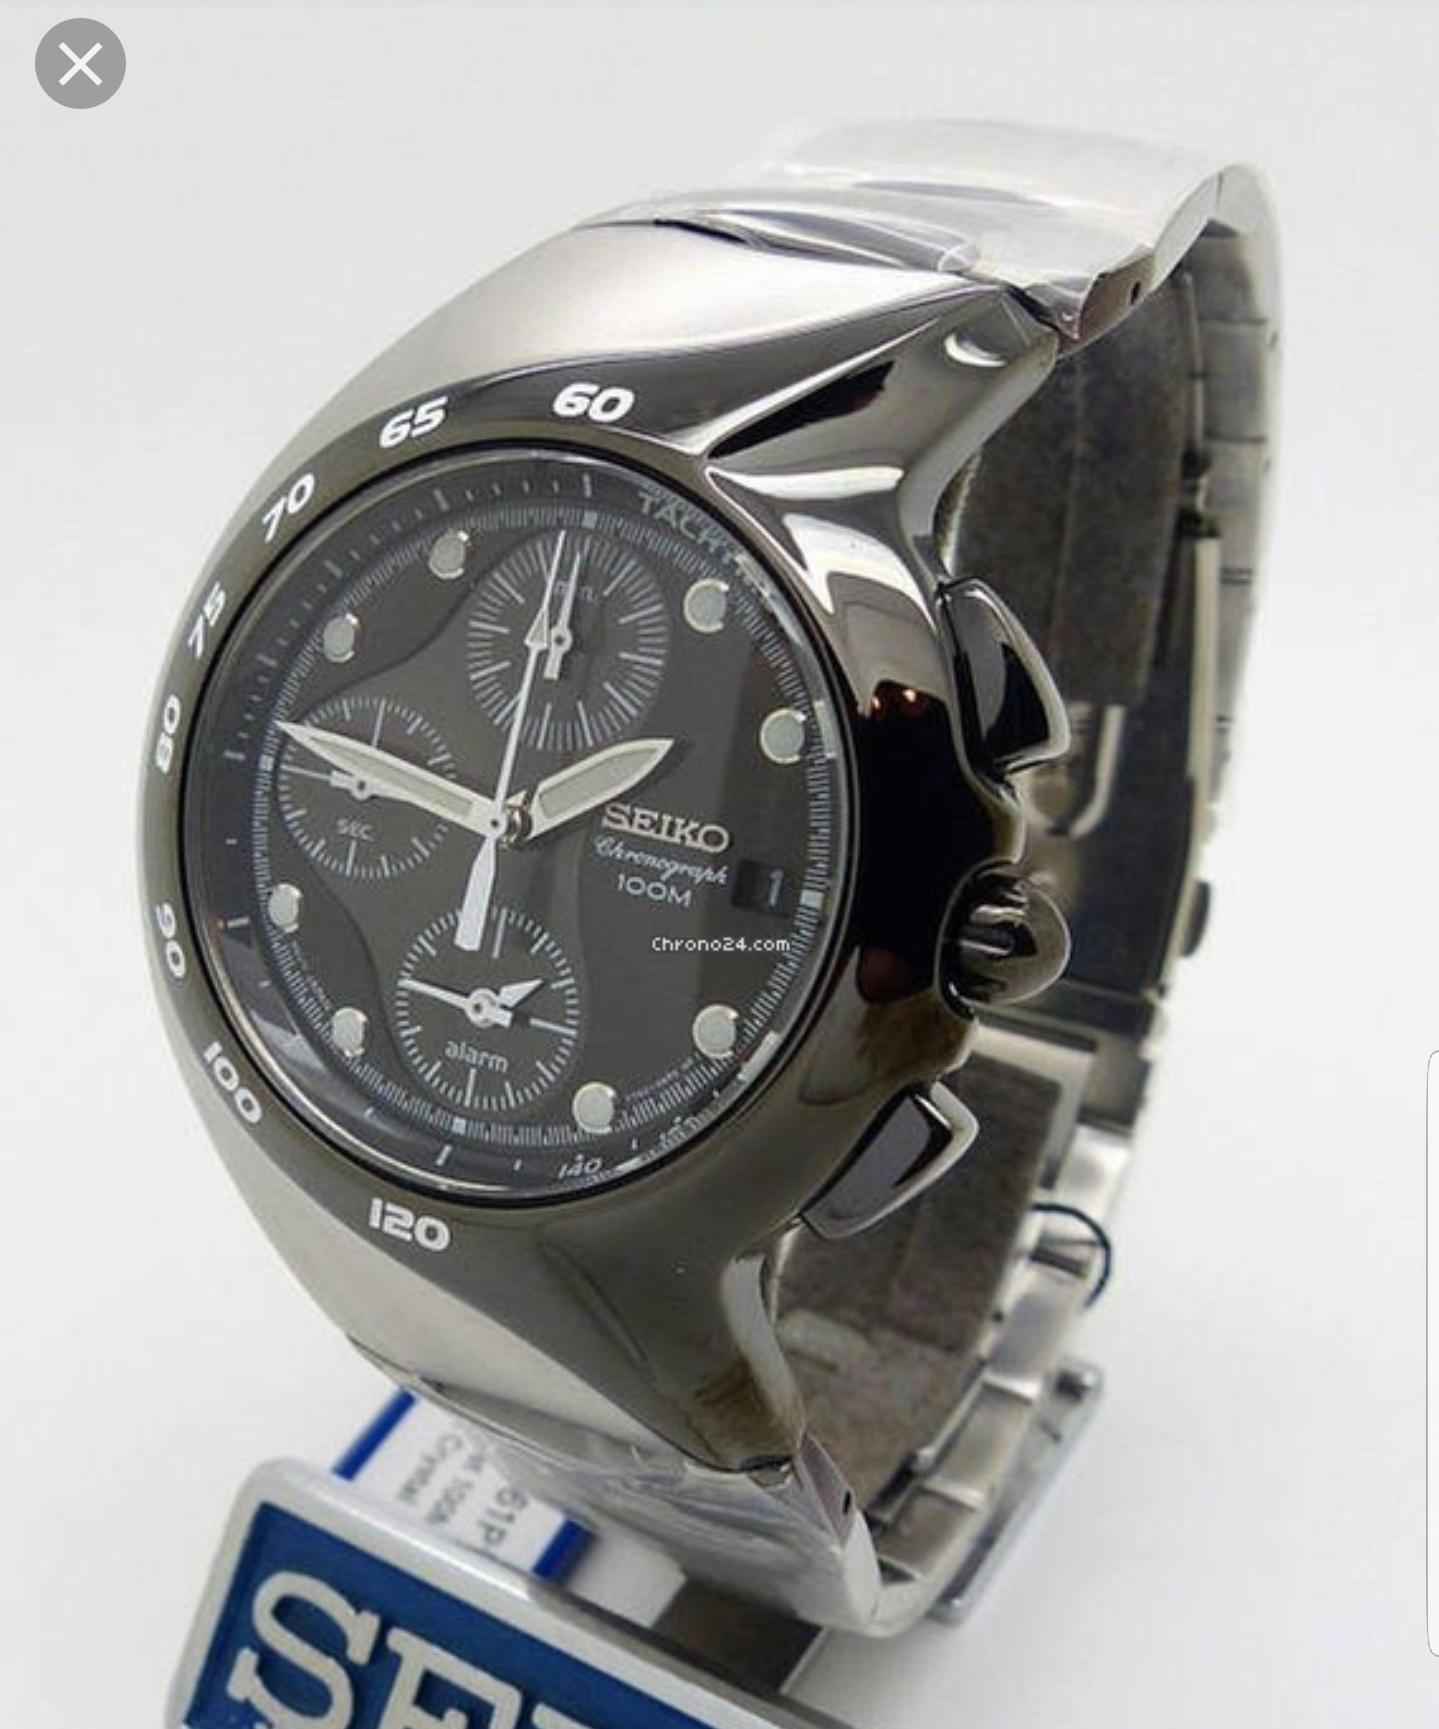 Trouble with a Seiko 7t62-0am0 from 2003 - Chat About Watches & The  Industry Here - Watch Repair Talk